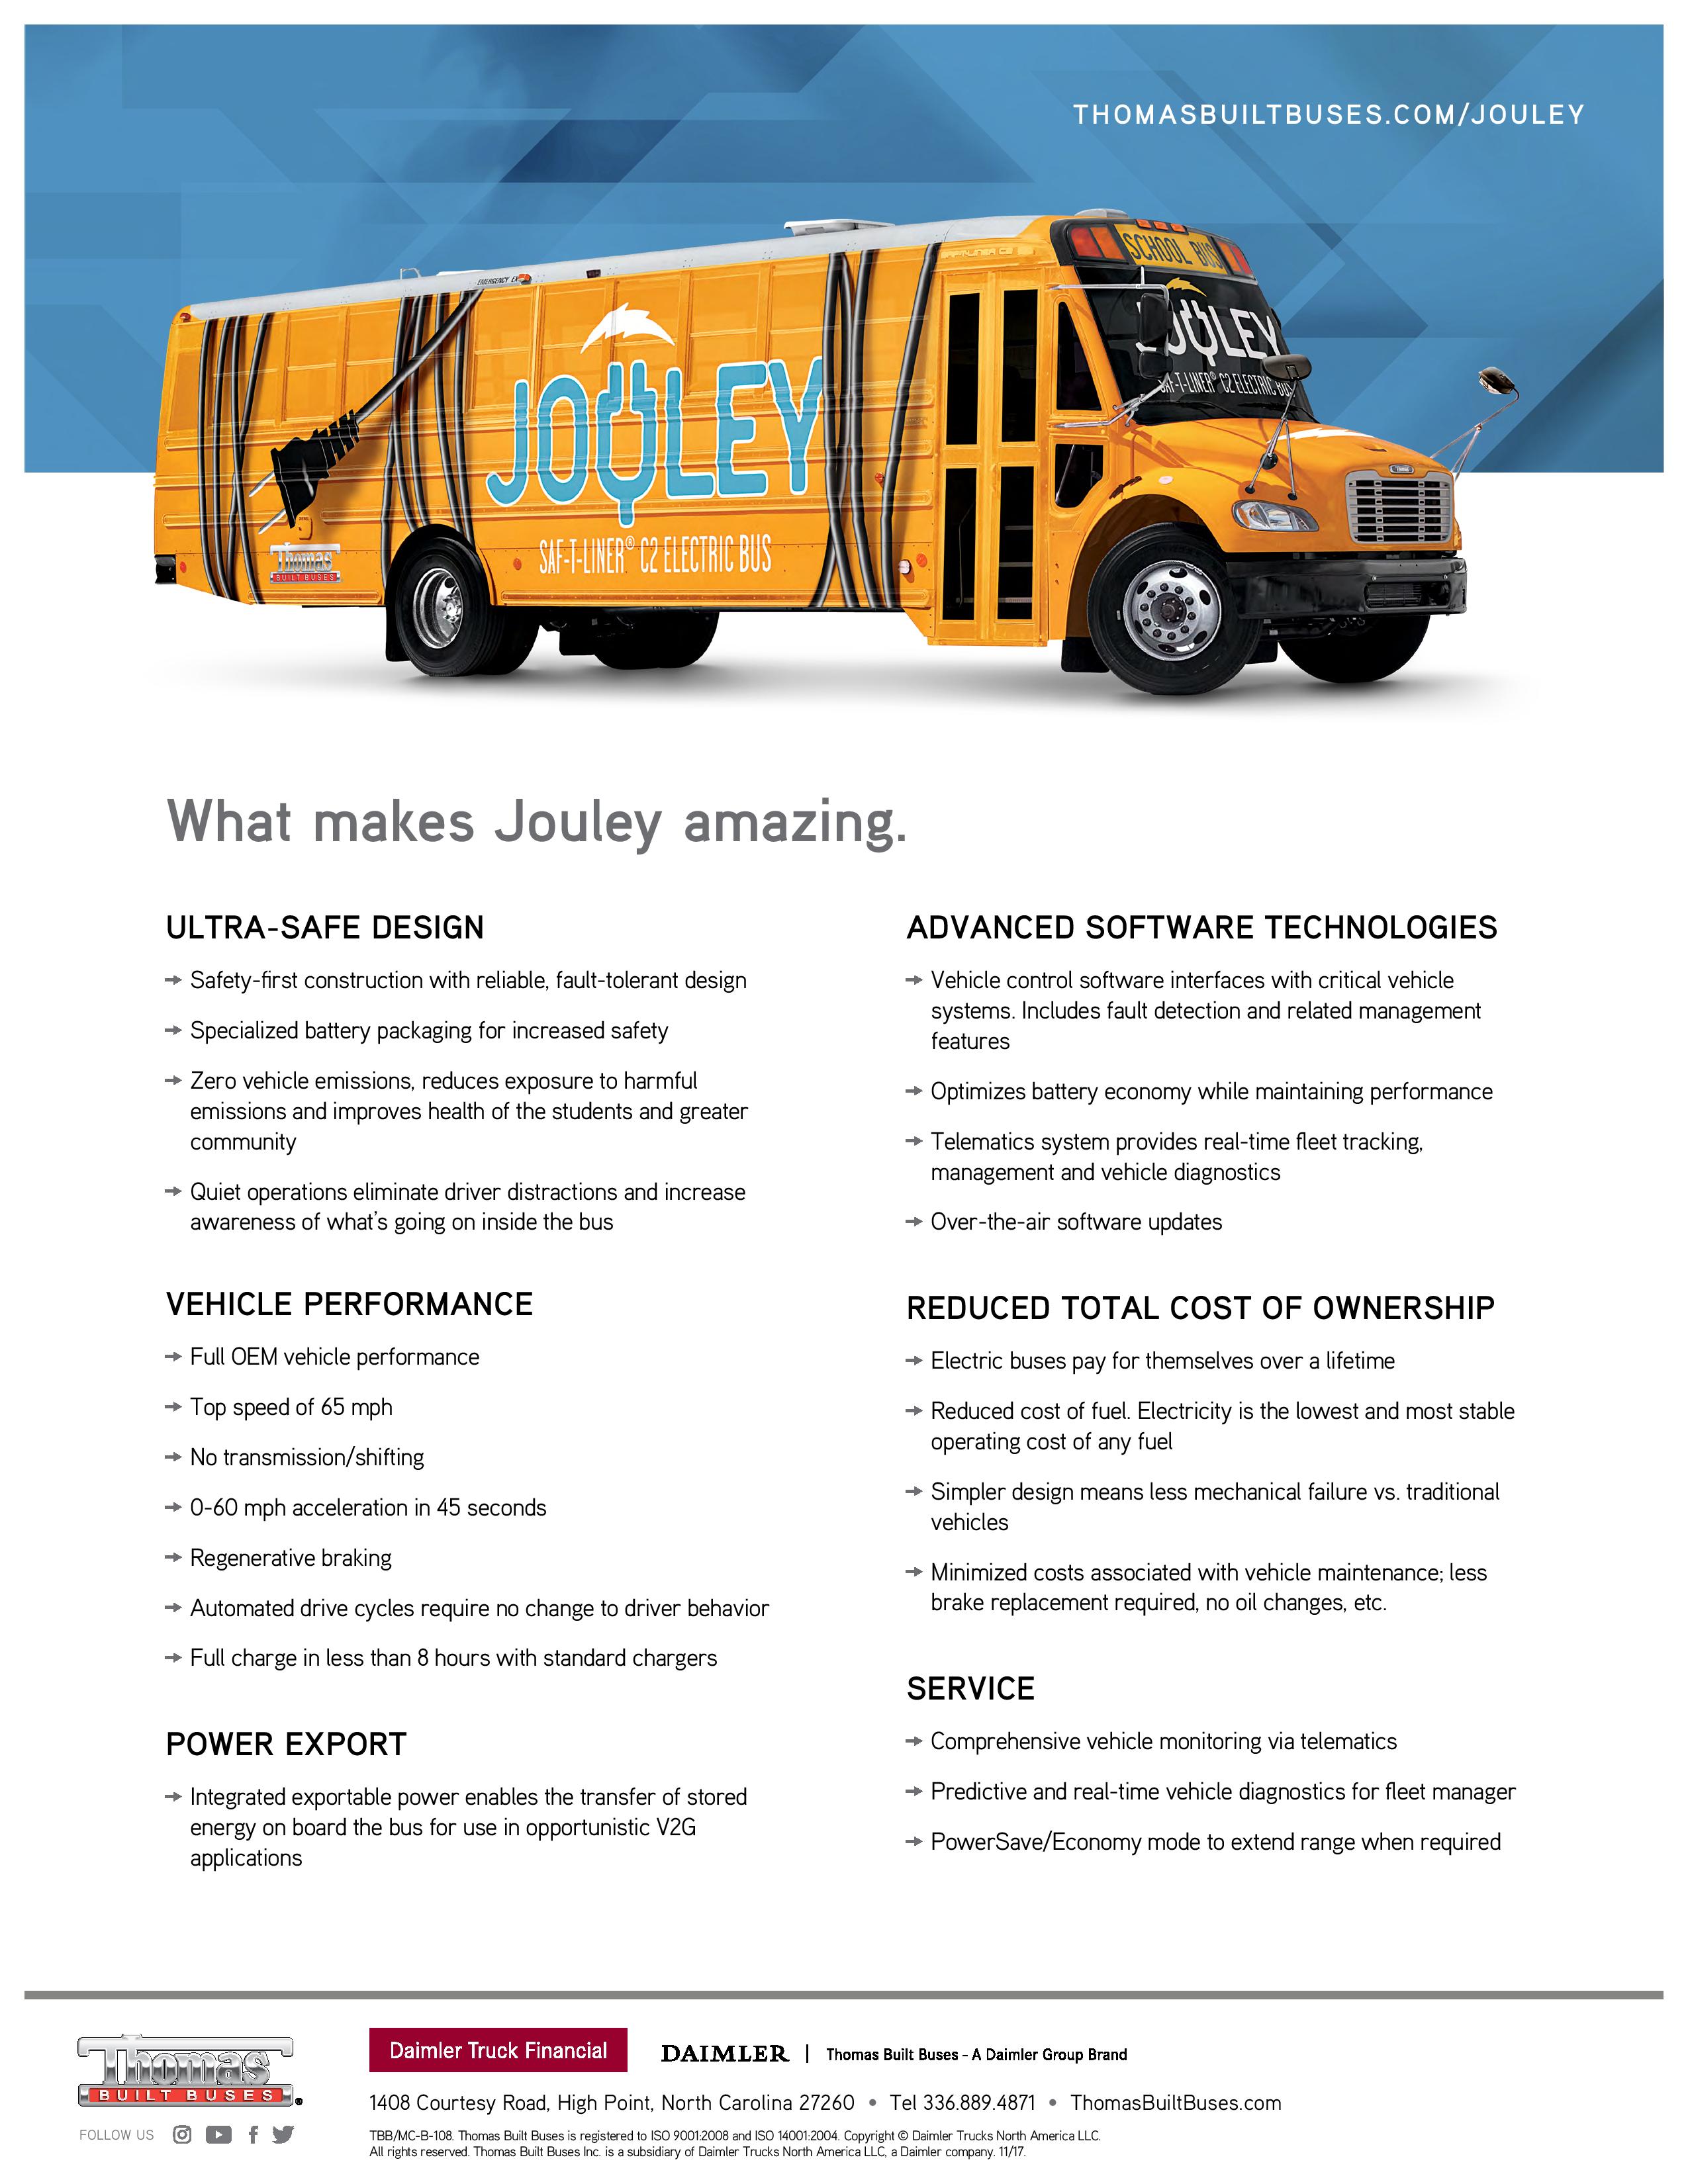 Jouley Electric C2 Bus Flyer